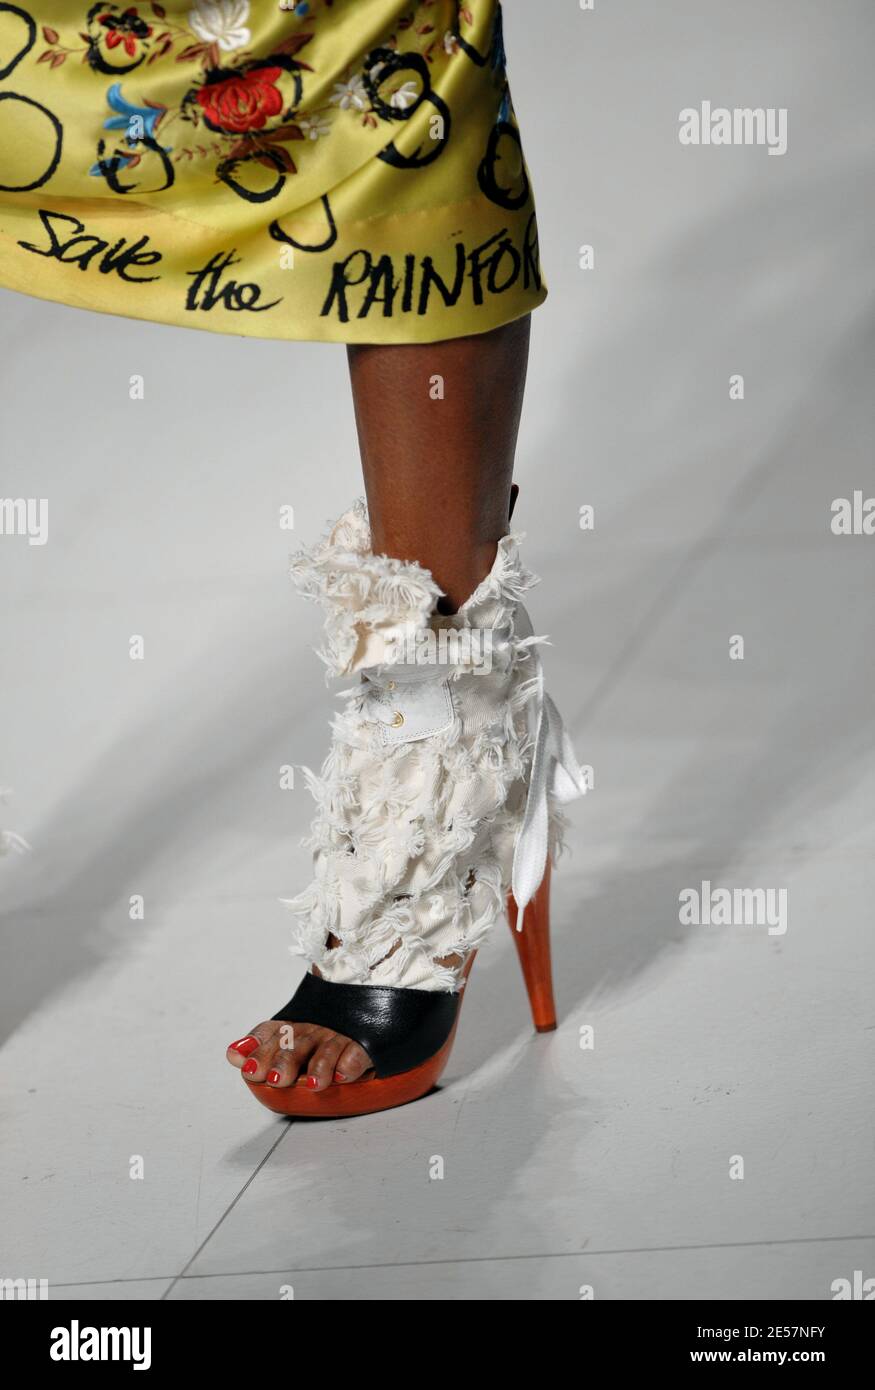 A model displays a creation by British designer Vivienne Westwood as part of her Spring-Summer 2009 Ready-to-Wear collection show in Paris, France on September 29, 2008. Photo by Thierry Orban/ABACAPRESS.COM Stock Photo